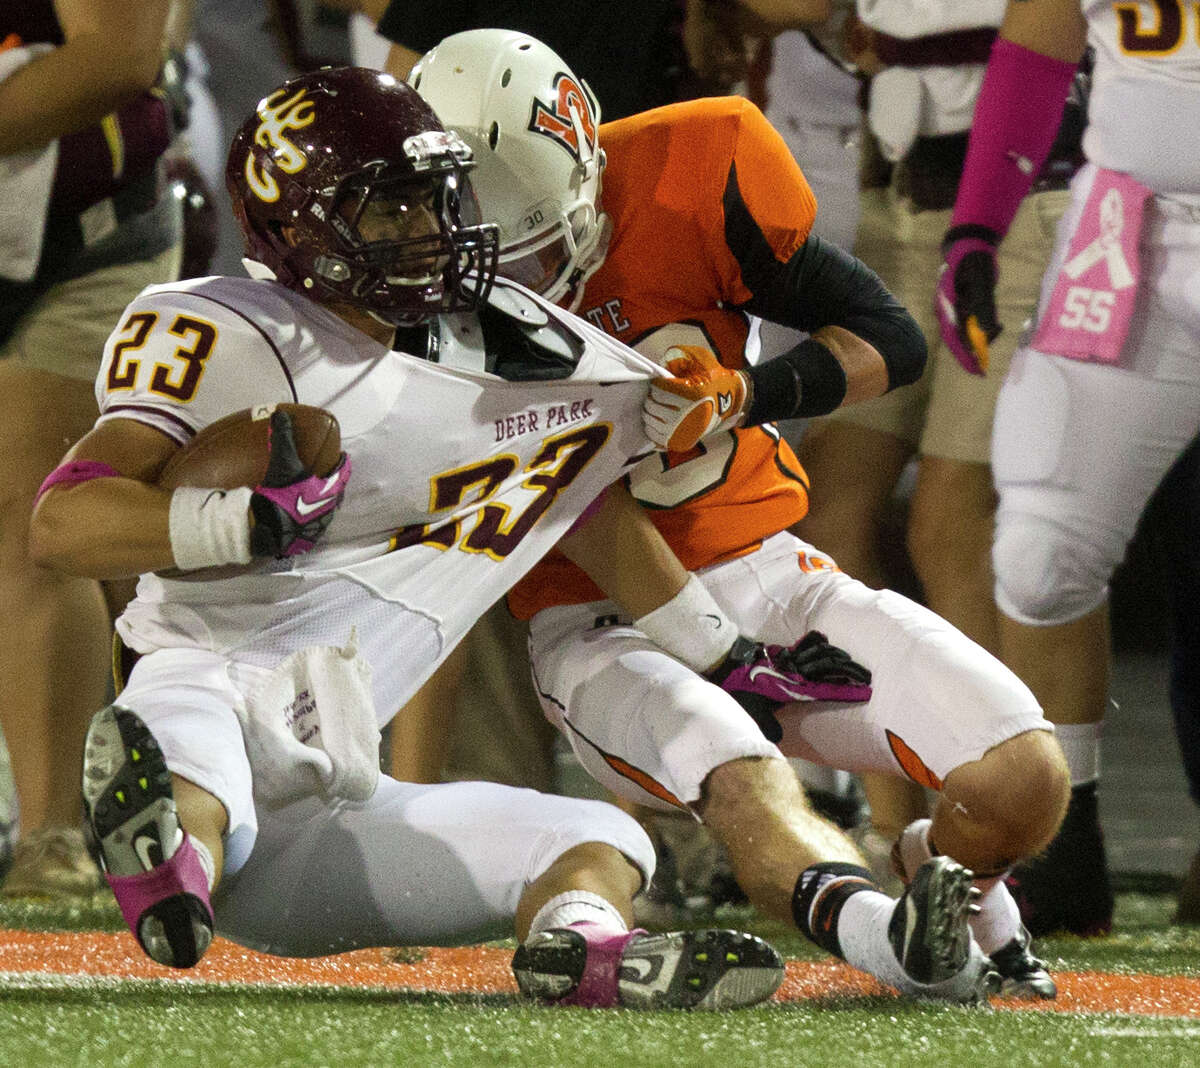 La Porte's Hoza Scott, right, brings down Deer Park running back Noah Cano during first-quarter action at Bulldog Stadium on Friday night. The two reunited on a pivotal fourth-quarter play when Scott turned a Cano fumble into the decisive touchdown.